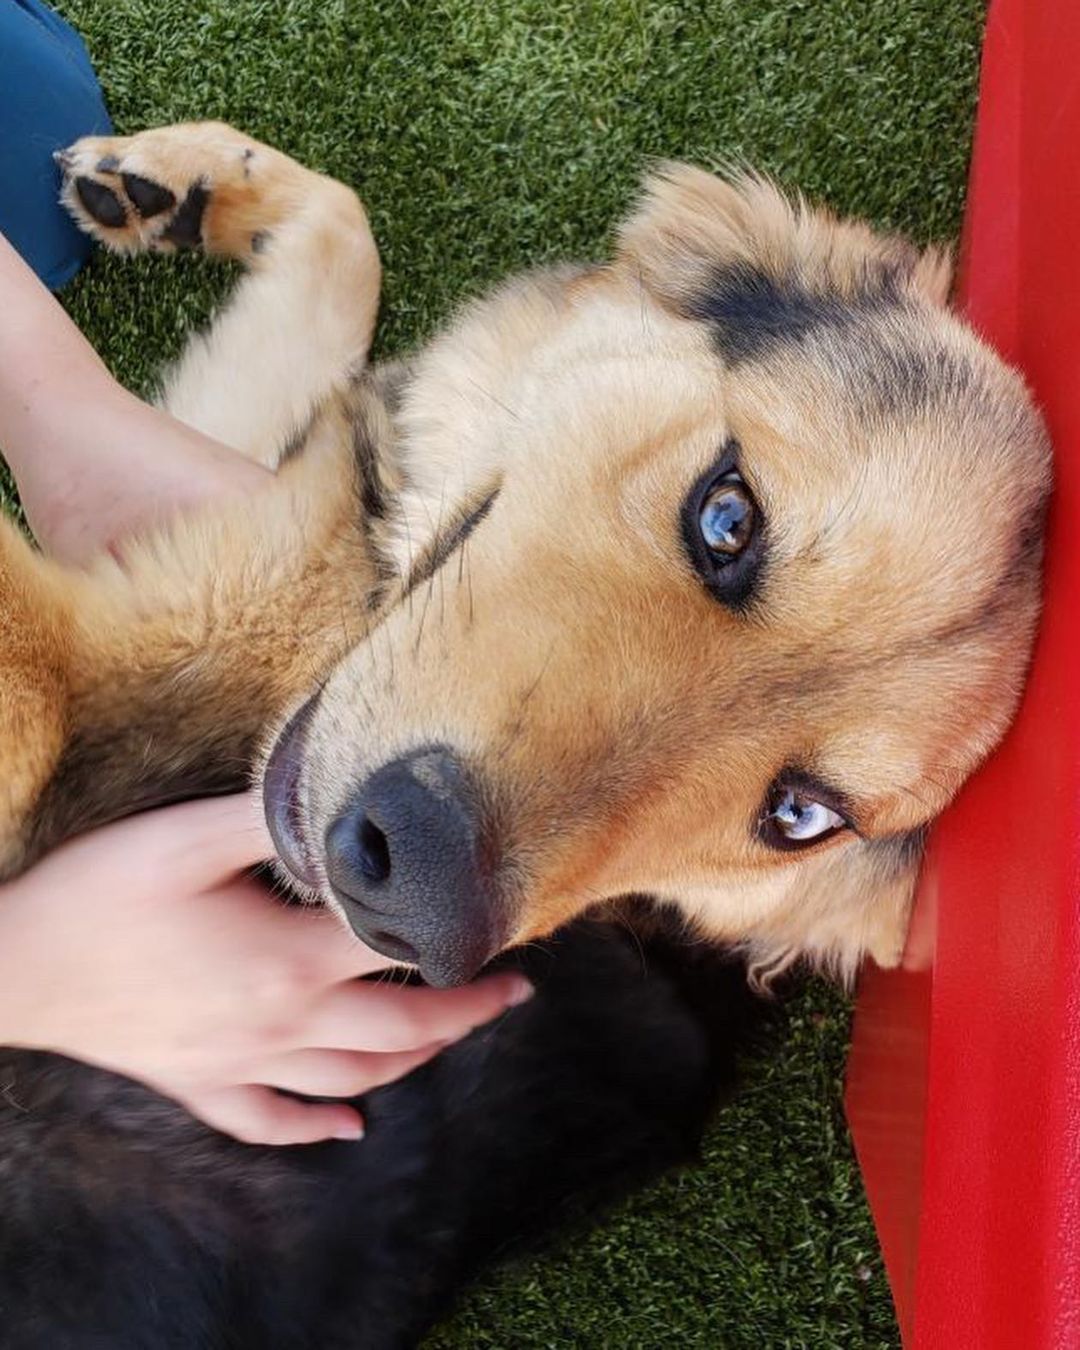 Leroy is a medium-sized fun-loving <a target='_blank' href='https://www.instagram.com/explore/tags/aussiemix/'>#aussiemix</a> who has already made lots of new friends! 📷: Taylor <a target='_blank' href='https://www.instagram.com/explore/tags/adoptdontshop/'>#adoptdontshop</a> <a target='_blank' href='https://www.instagram.com/explore/tags/mesmereyez/'>#mesmereyez</a> <a target='_blank' href='https://www.instagram.com/explore/tags/getupgetout/'>#getupgetout</a> <a target='_blank' href='https://www.instagram.com/explore/tags/nosofaspuds/'>#nosofaspuds</a> <a target='_blank' href='https://www.instagram.com/explore/tags/shepherdmix/'>#shepherdmix</a> <a target='_blank' href='https://www.instagram.com/explore/tags/fluffydogs/'>#fluffydogs</a> <a target='_blank' href='https://www.instagram.com/explore/tags/scottsdale/'>#scottsdale</a> <a target='_blank' href='https://www.instagram.com/explore/tags/gilbertaz/'>#gilbertaz</a> <a target='_blank' href='https://www.instagram.com/explore/tags/phoenix/'>#phoenix</a> <a target='_blank' href='https://www.instagram.com/explore/tags/springinthedesert/'>#springinthedesert</a> <a target='_blank' href='https://www.instagram.com/explore/tags/azfamily/'>#azfamily</a>